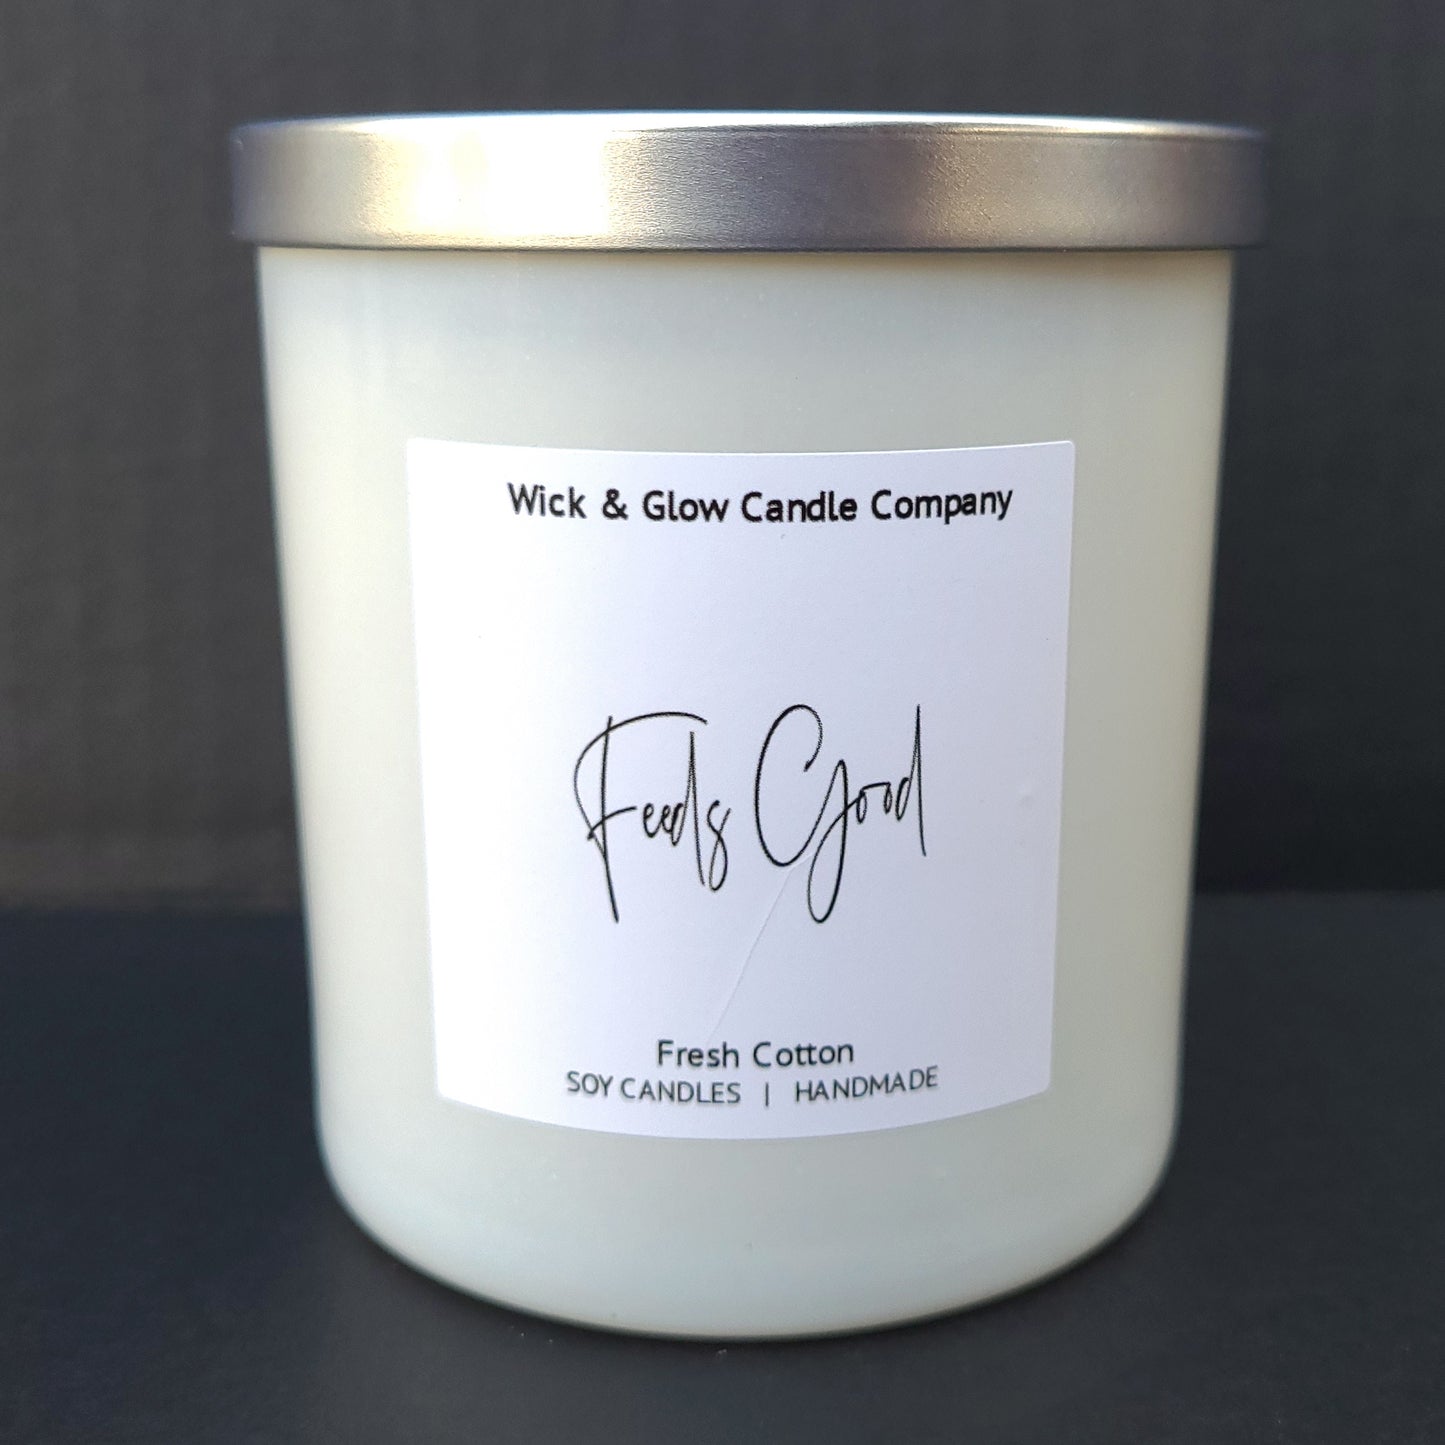 Feels Good- Fresh Linen Luxury Scented Candle - The Wick and Glow Candle Company